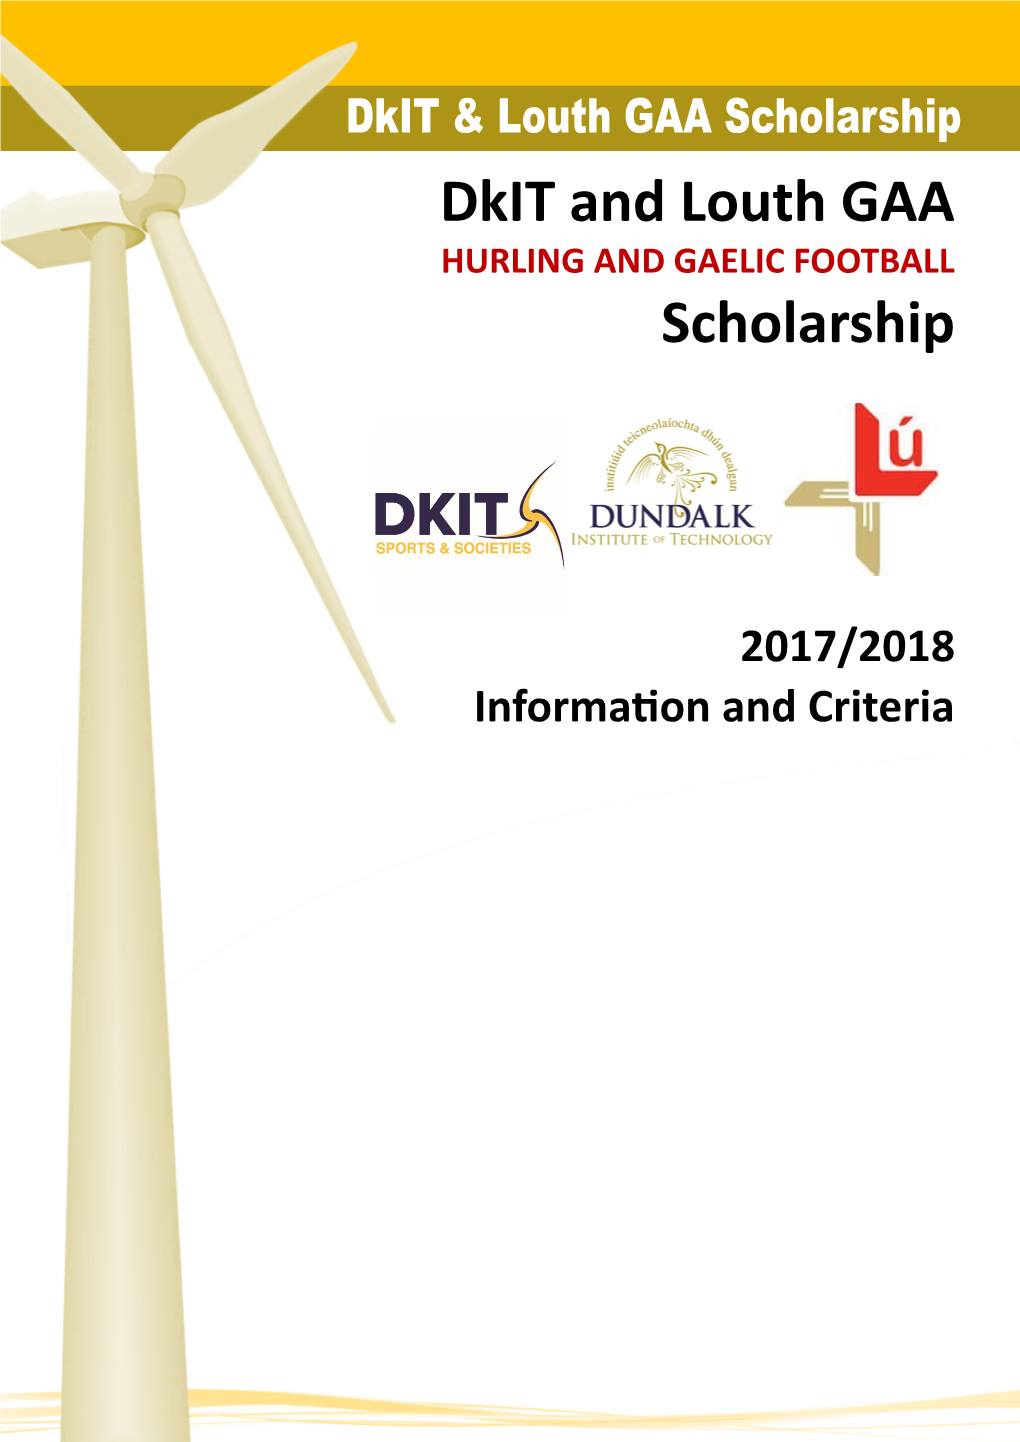 Dkit and Louth GAA Scholarship Application Form by 12 Noon 5Th May 2017